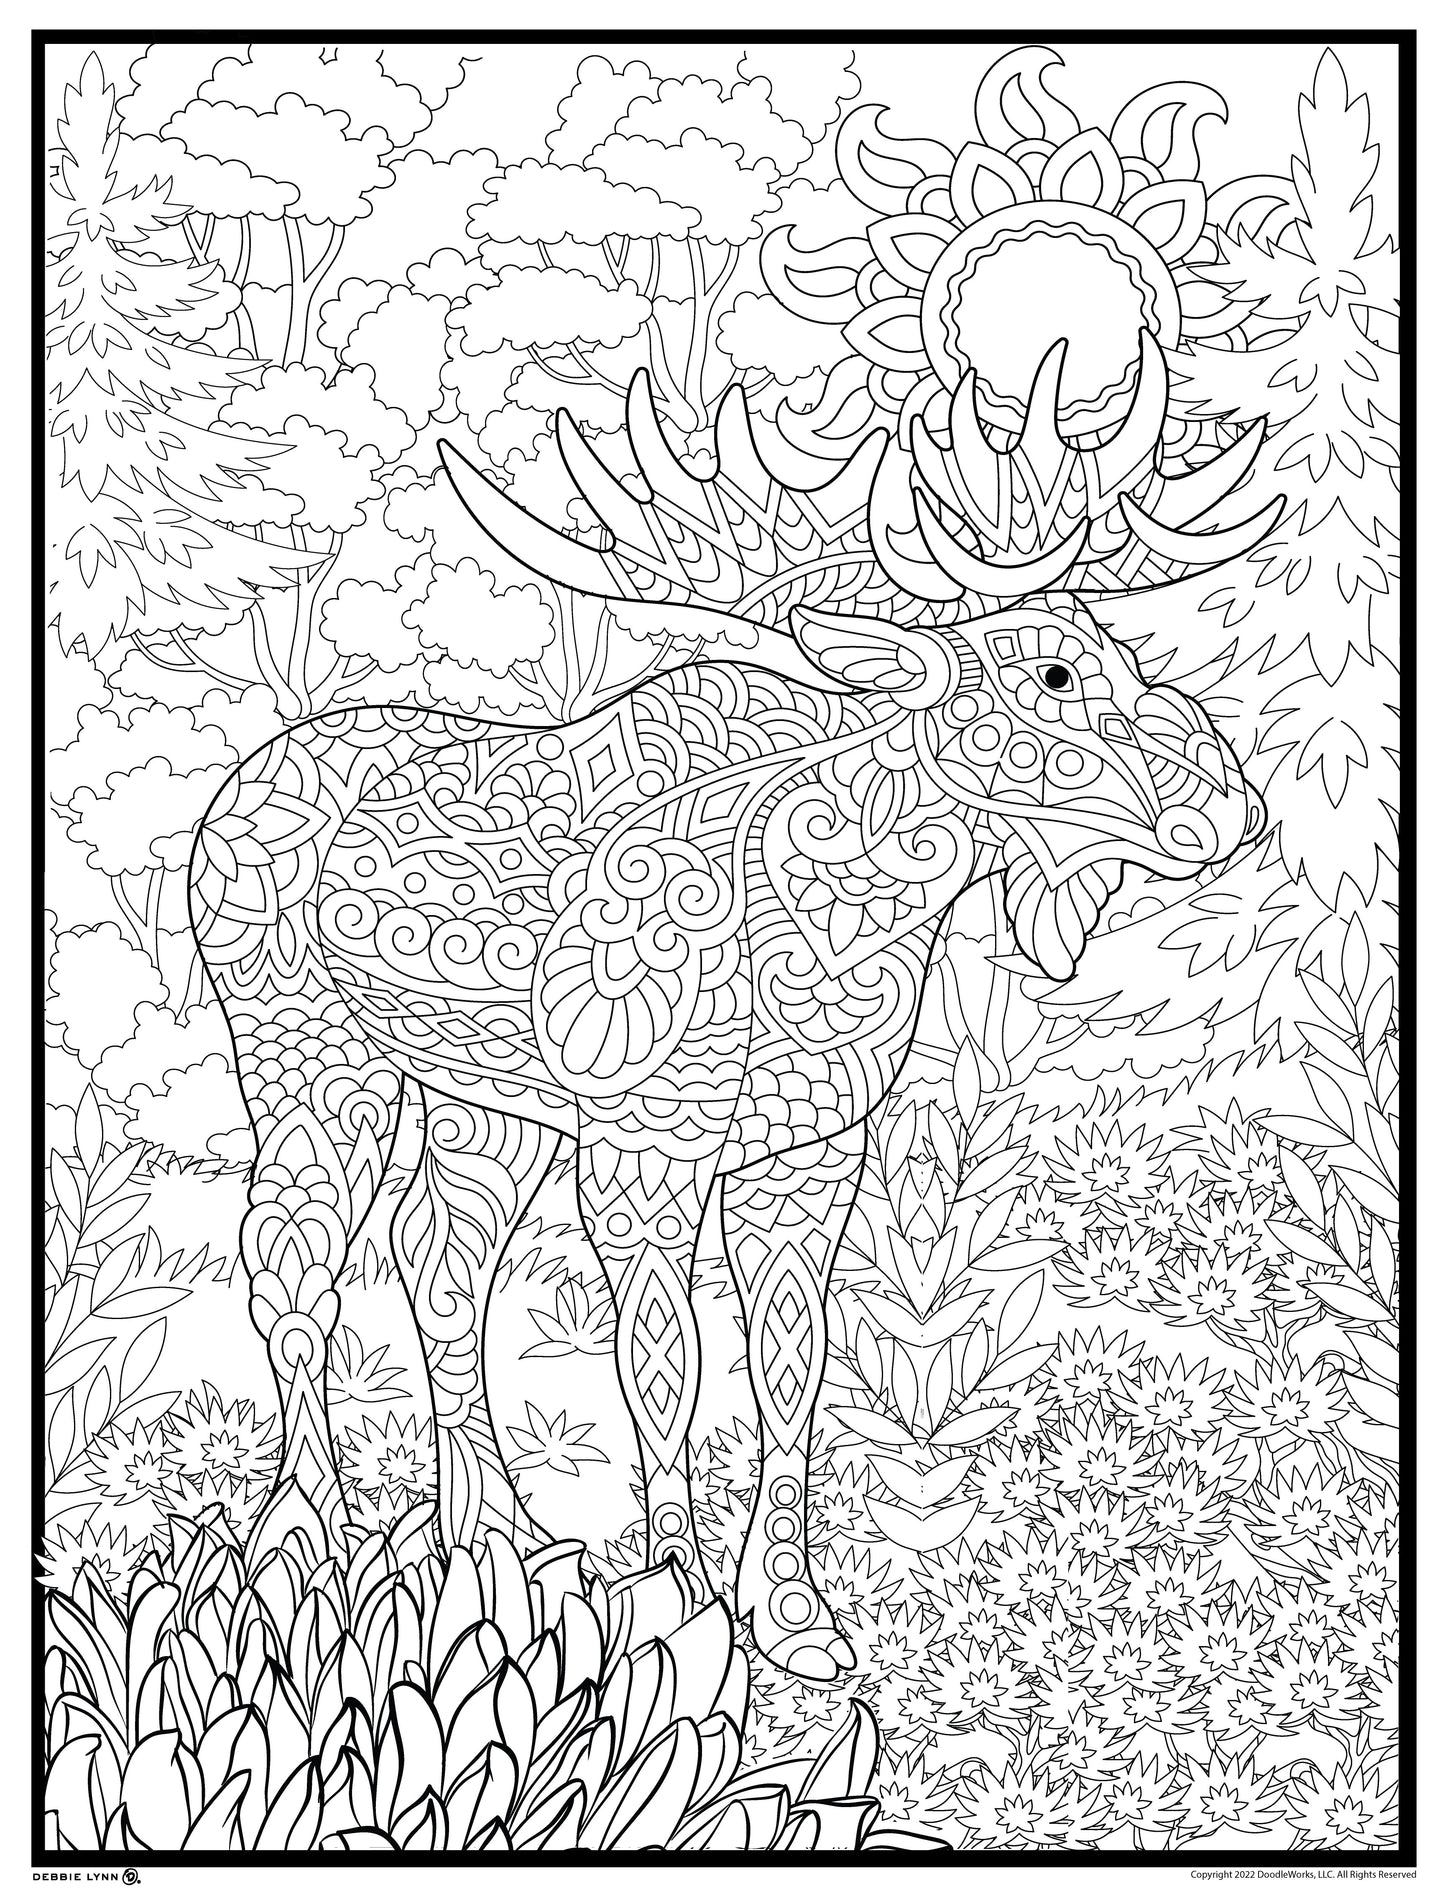 Moose Personalized Giant Coloring Poster 46"x60"